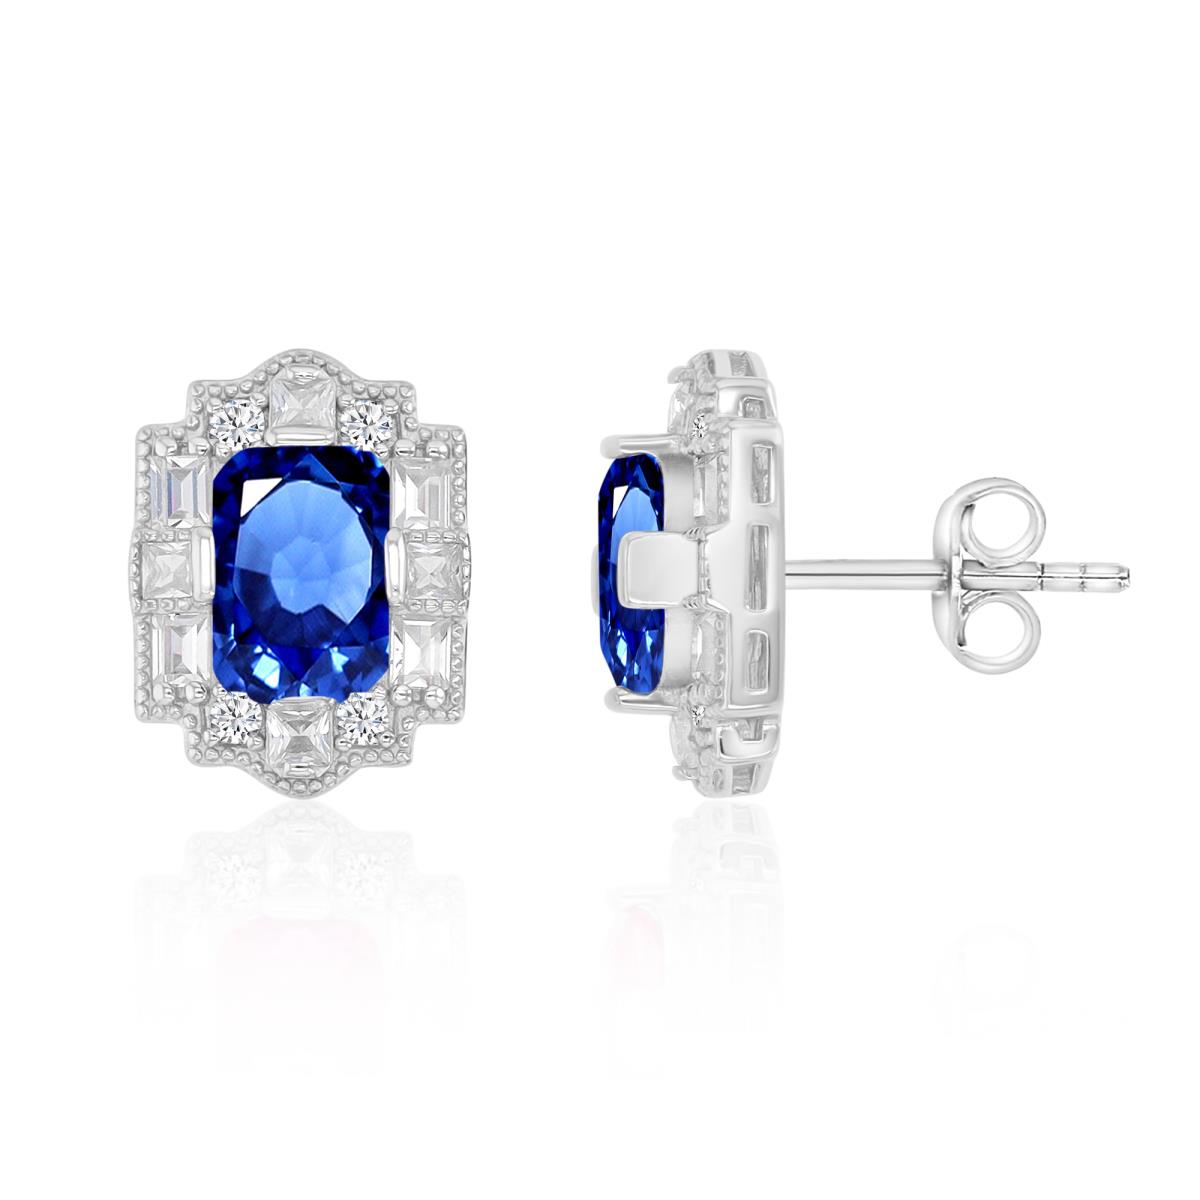 Sterling Silver Rhodium 15X11.5MM Polished Cr Blue & Cr White Sapphire Vintage Emerald Cut Stud Earrings